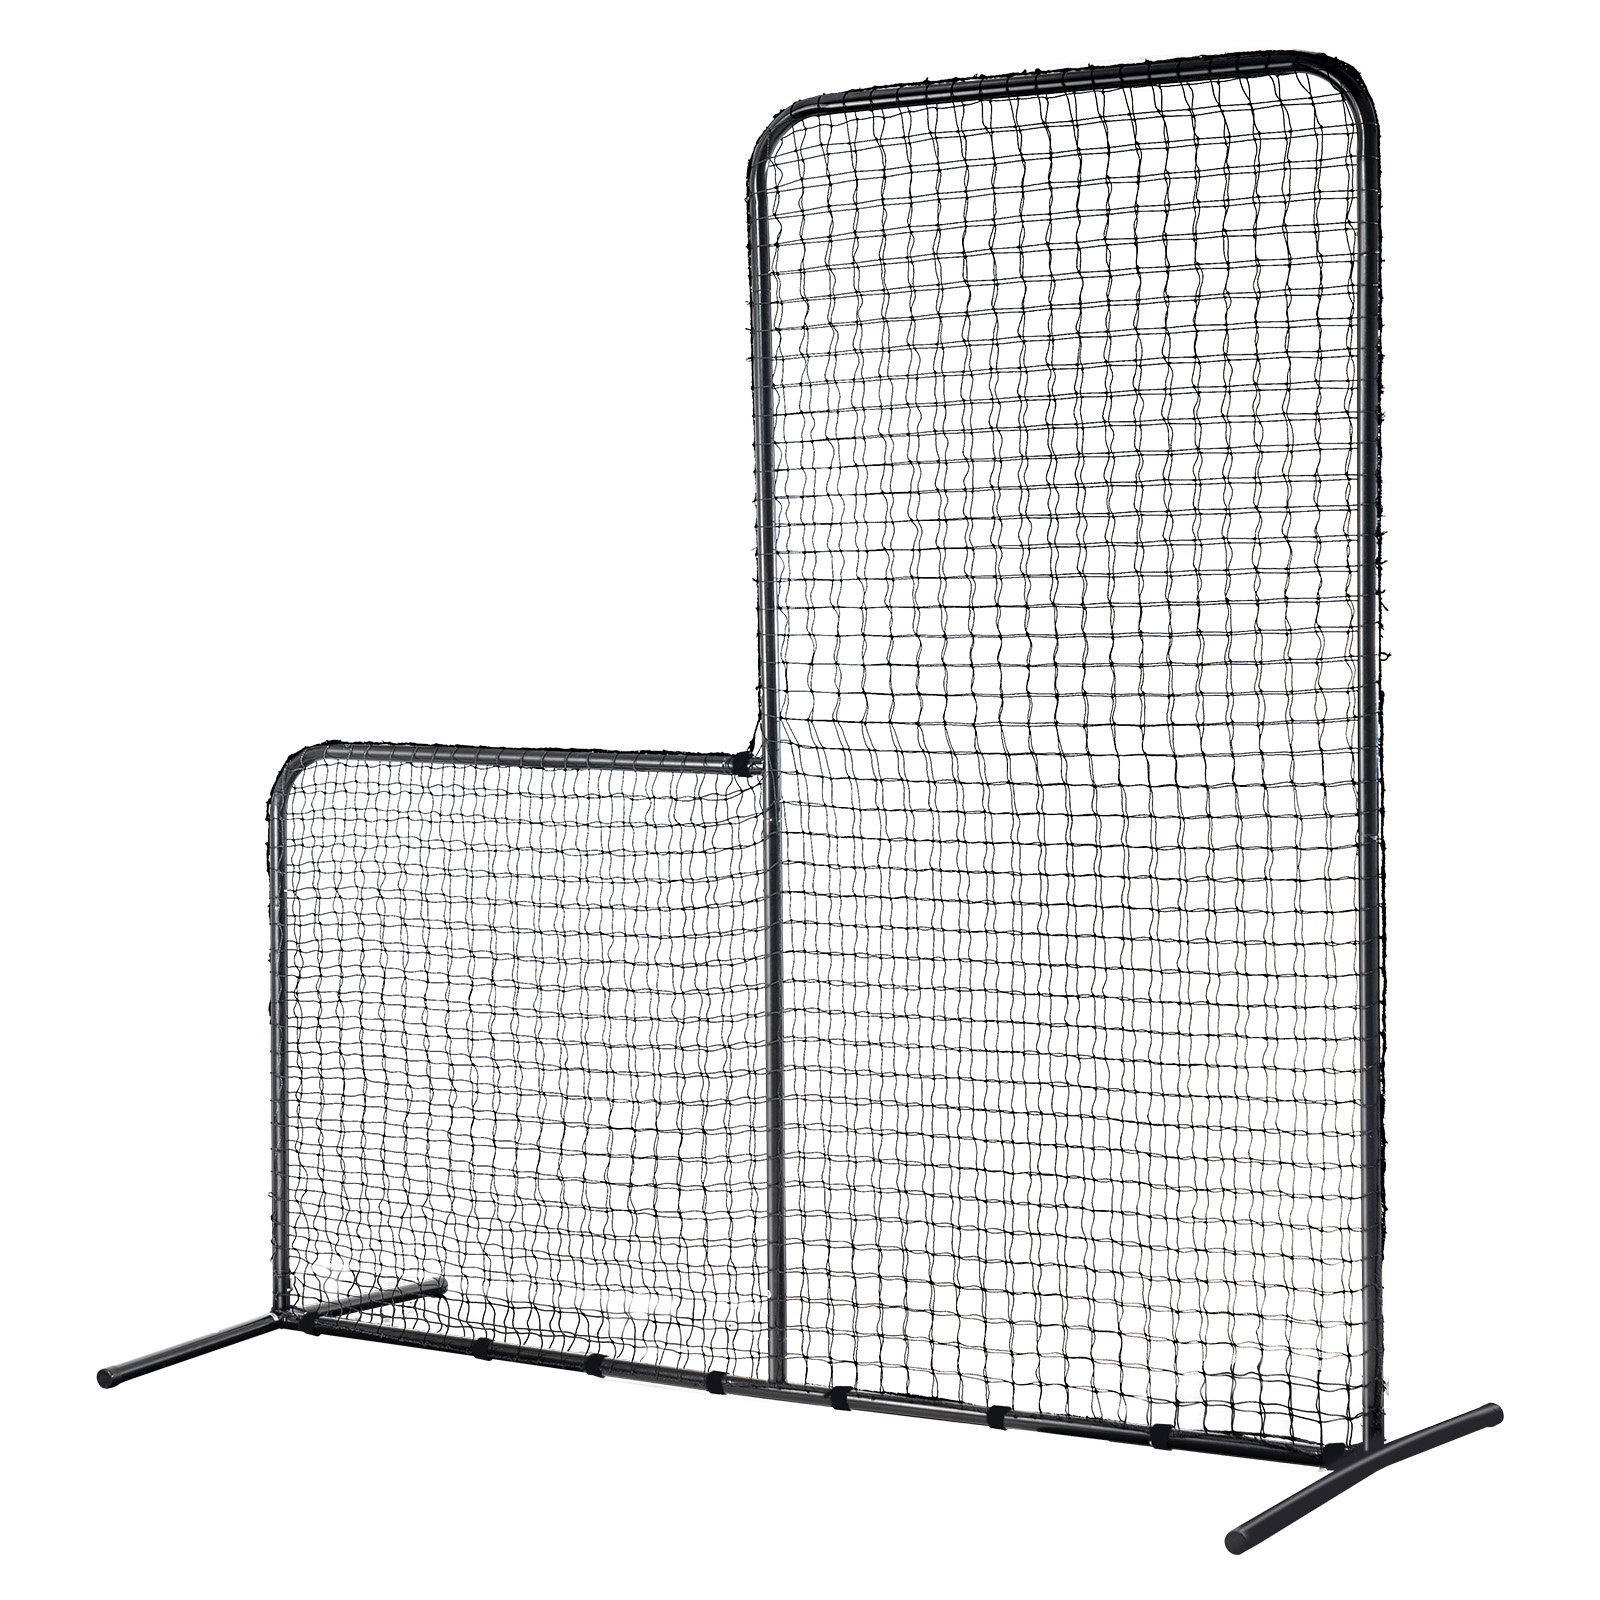 VEVOR L Screen Baseball for Batting Cage, 7x7 ft Baseball Softball Safety Screen, Body Protector Portable Batting Screen with Carry Bag & Ground Stakes, Heavy Duty Pitching Net for Pitchers Protection, Goodies N Stuff